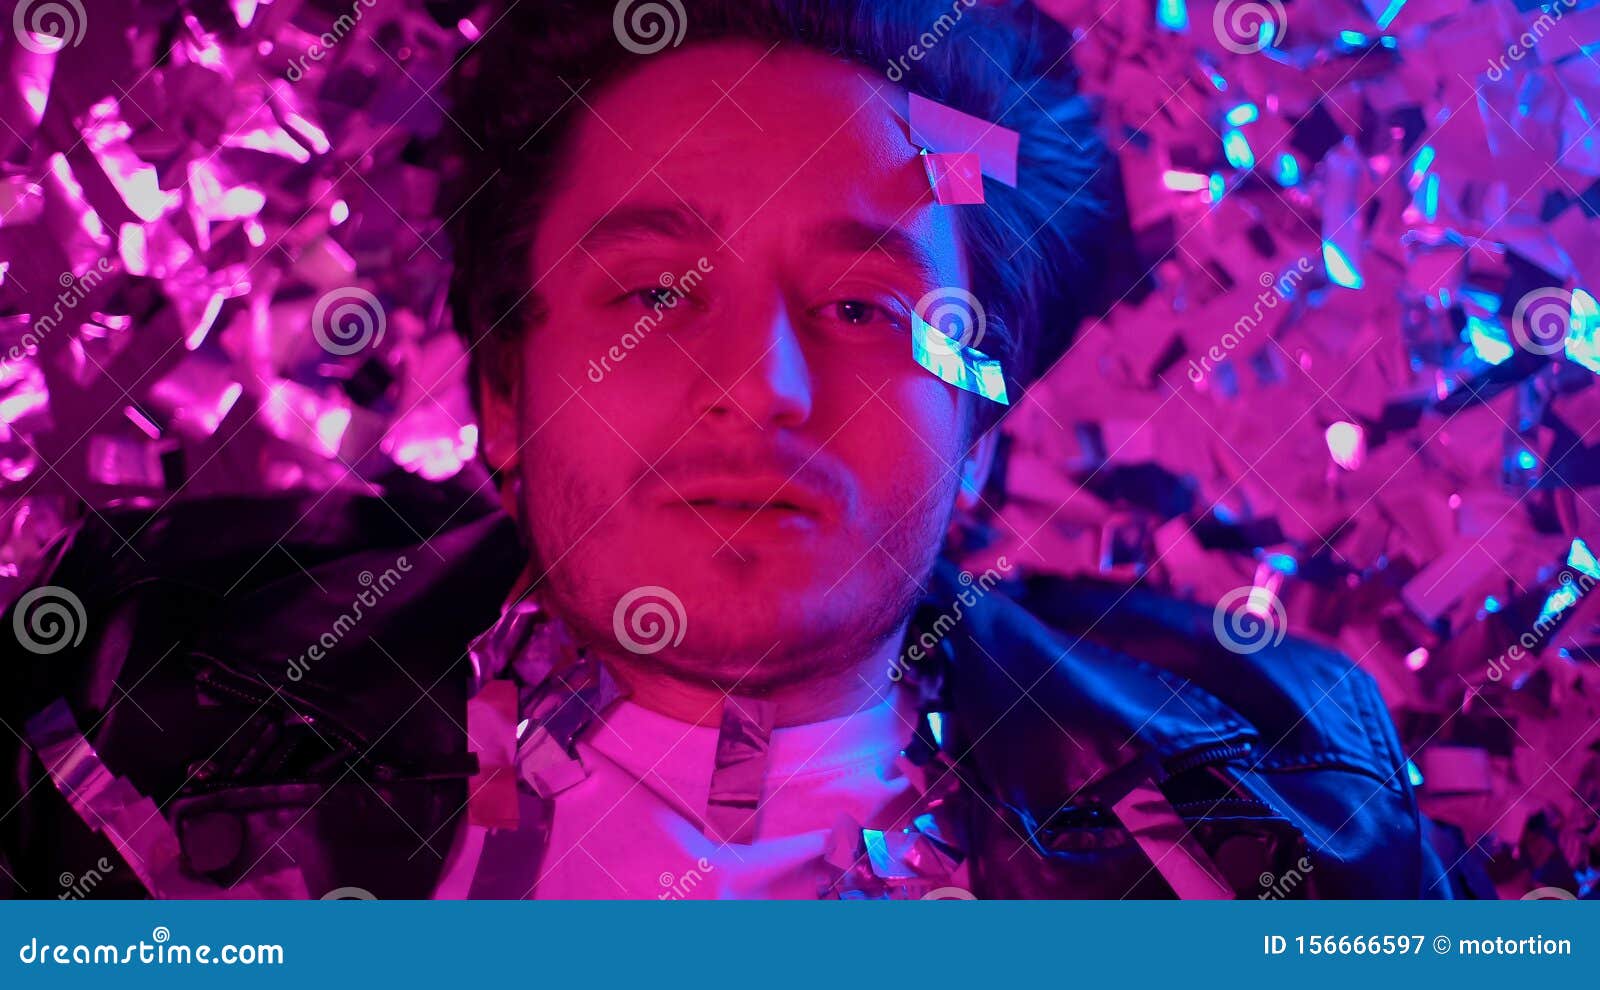 intoxicated man lying on floor among confetti and looking at camera, addict